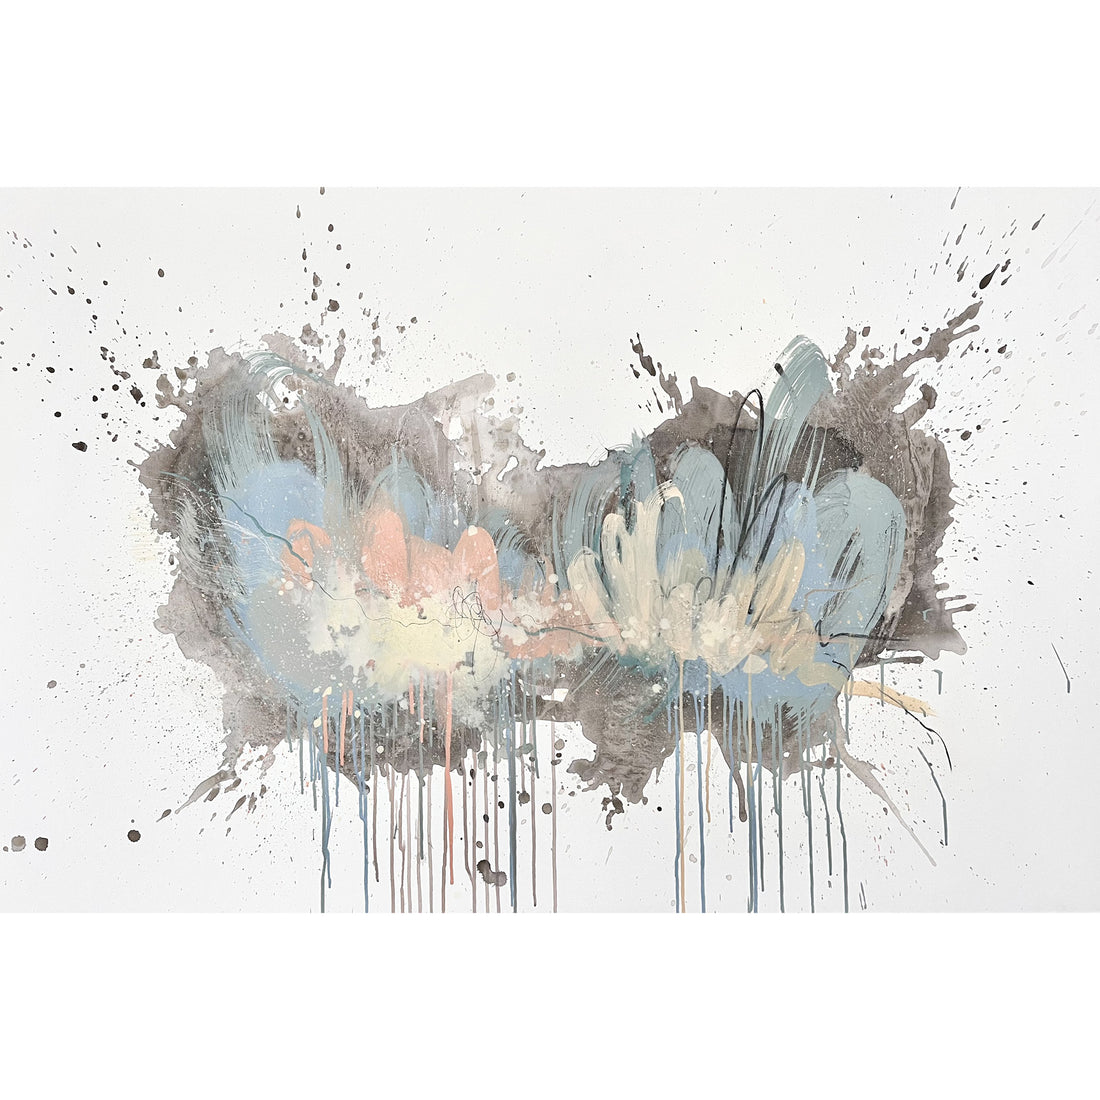 Sarah Sky "A Small Poem" abstract painting 